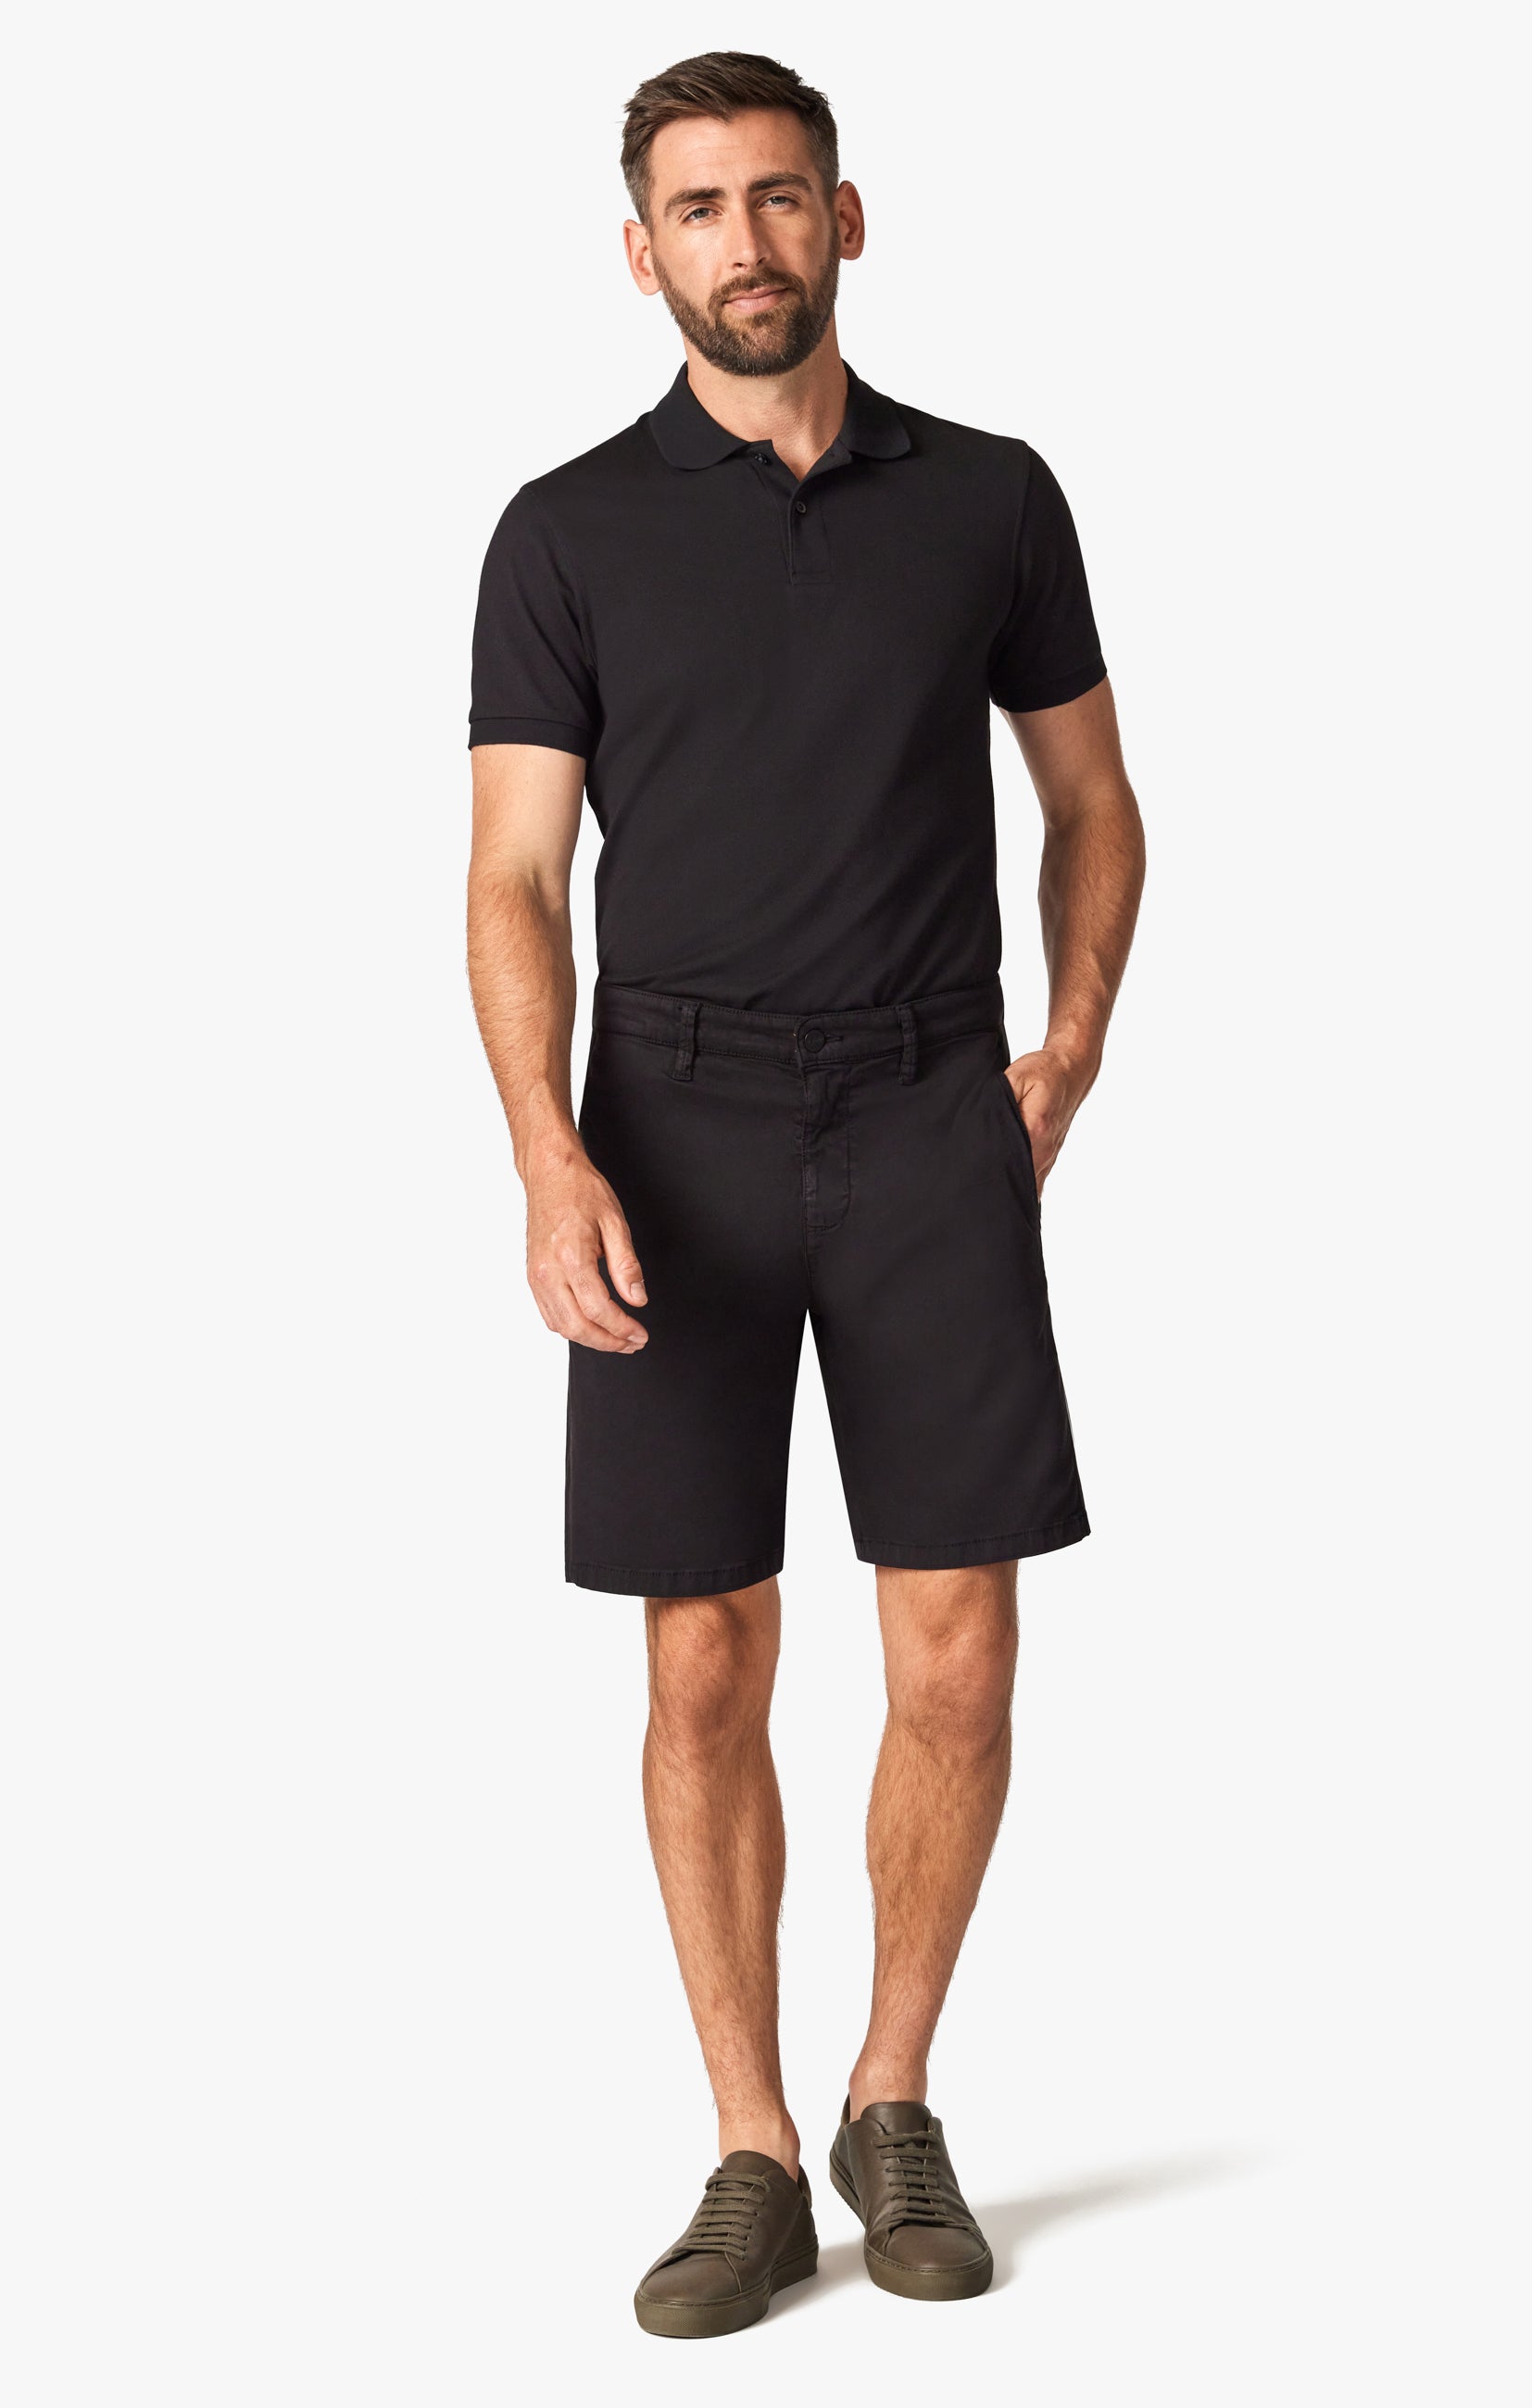 Nevada Shorts In Black Soft Touch Image 1